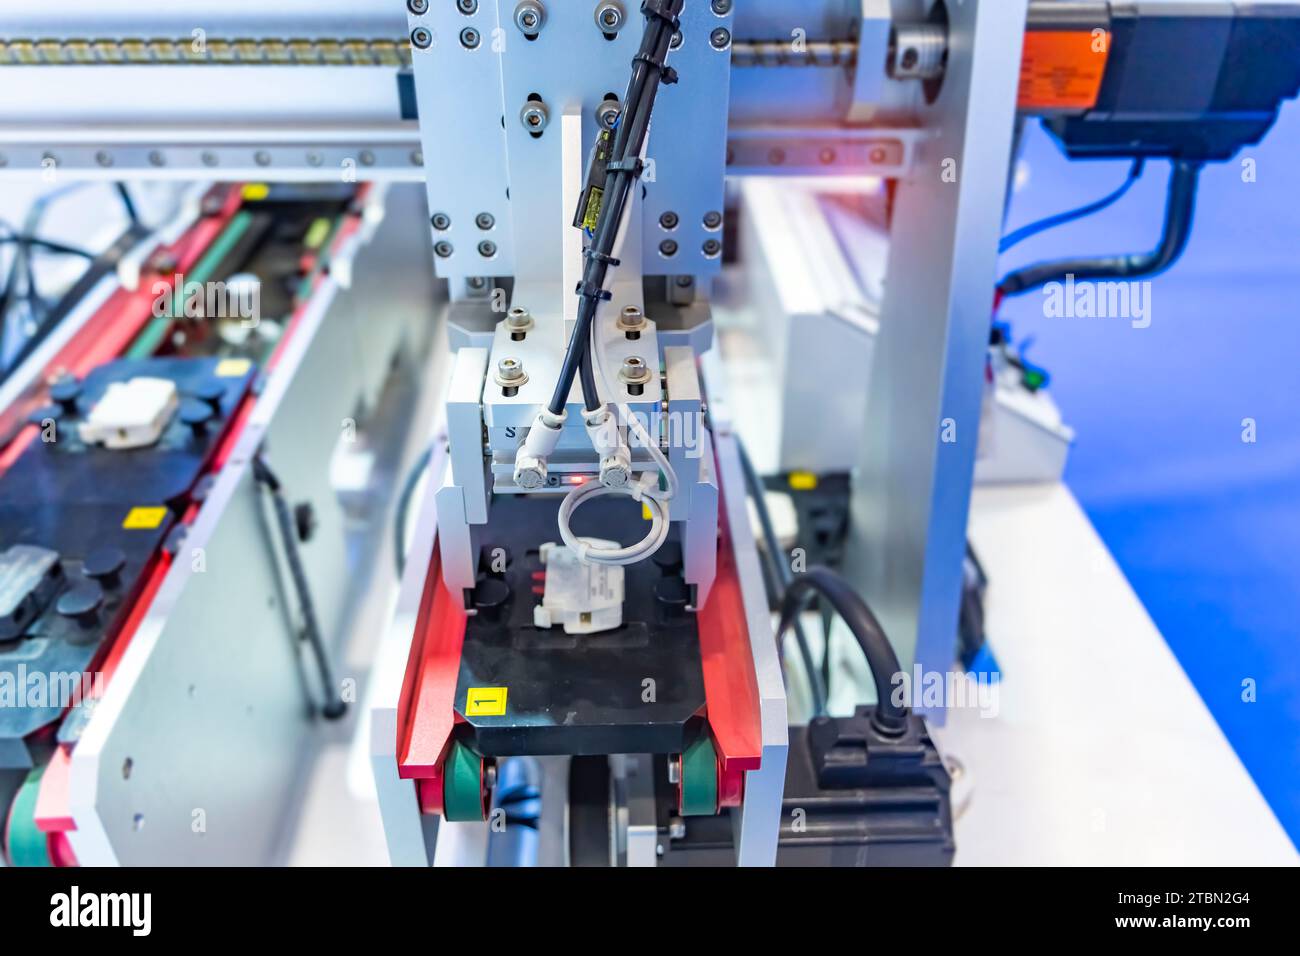 robot arm machine tool at industrial manufacture plant,Smart factory industry 4.0 concept. Stock Photo